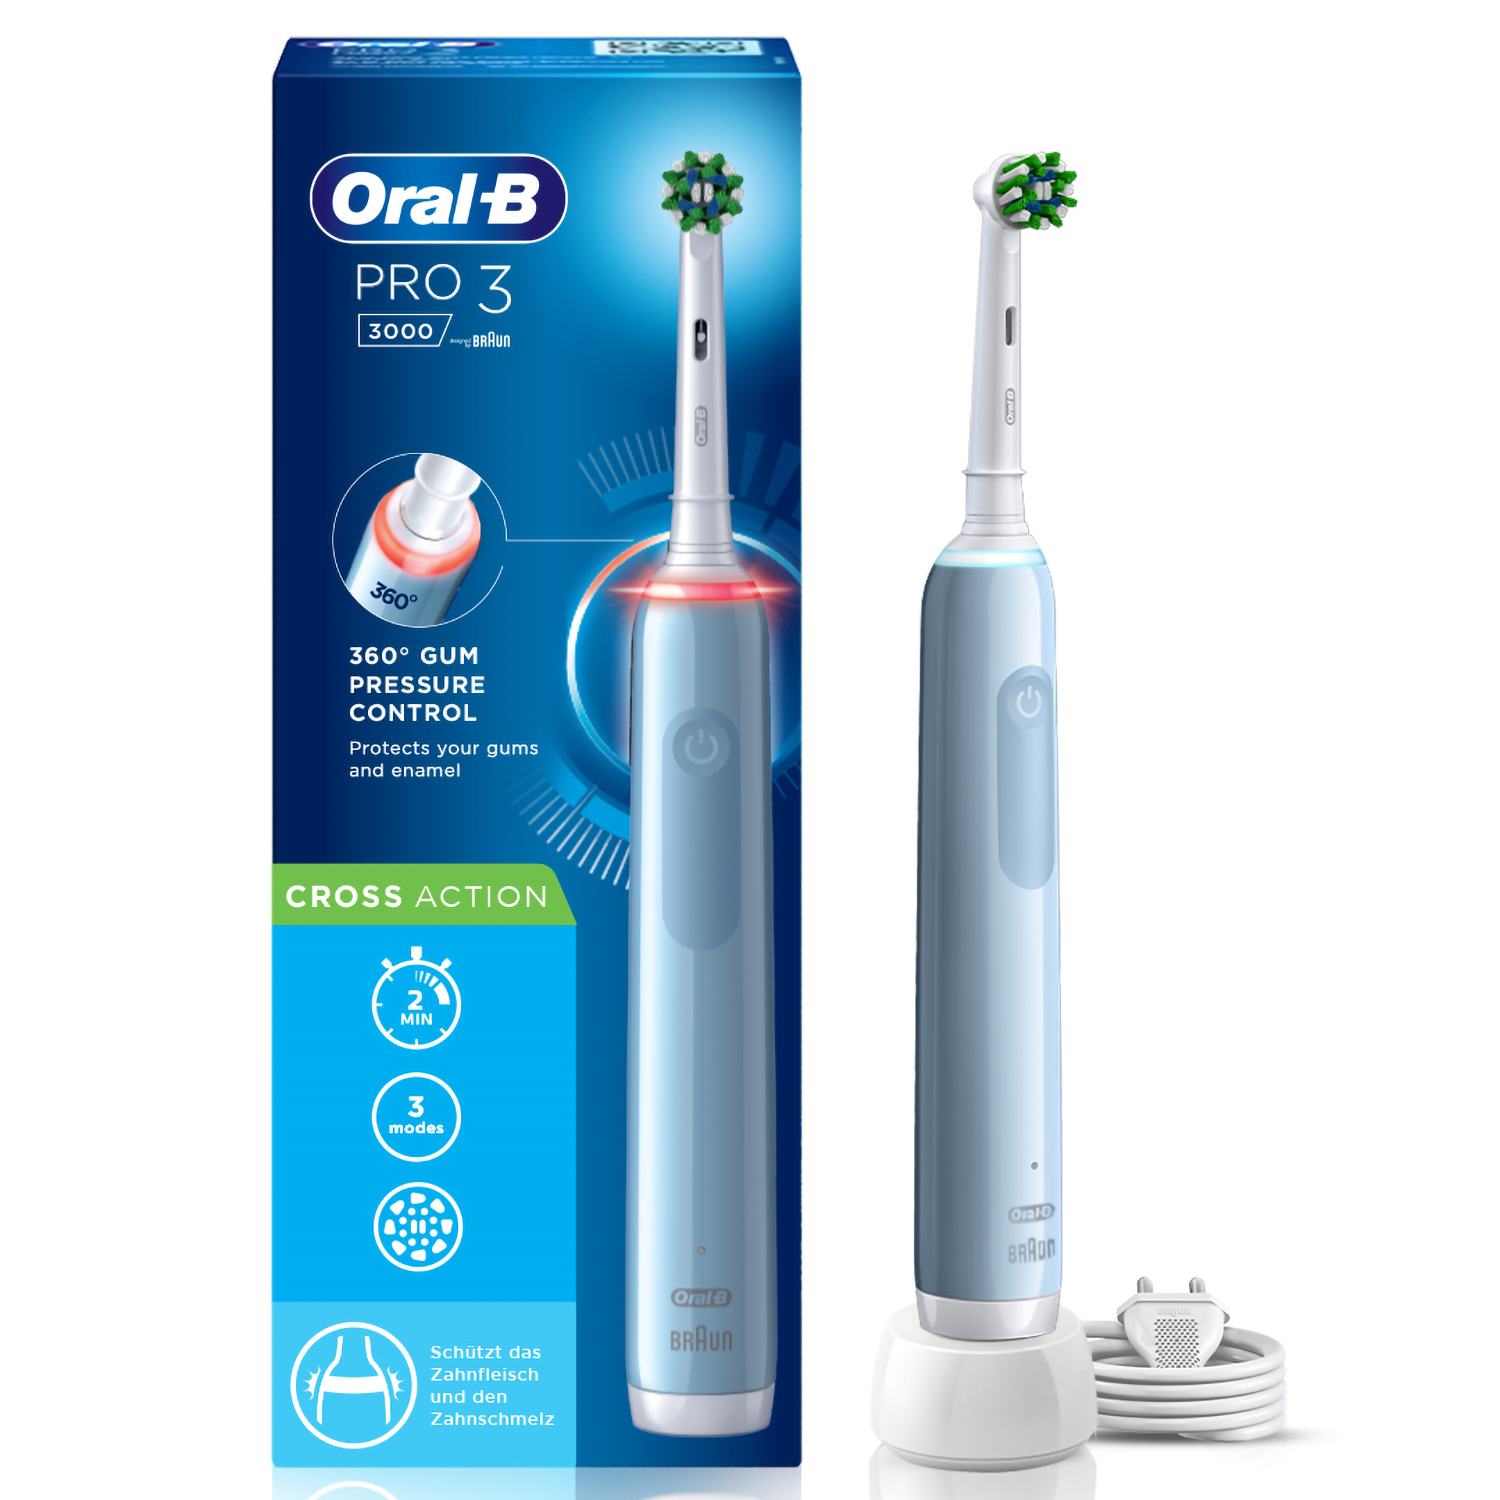 Oral B Pro 3 Electric Toothbrush 3 modes with Triple pressure control replaceable brush head included